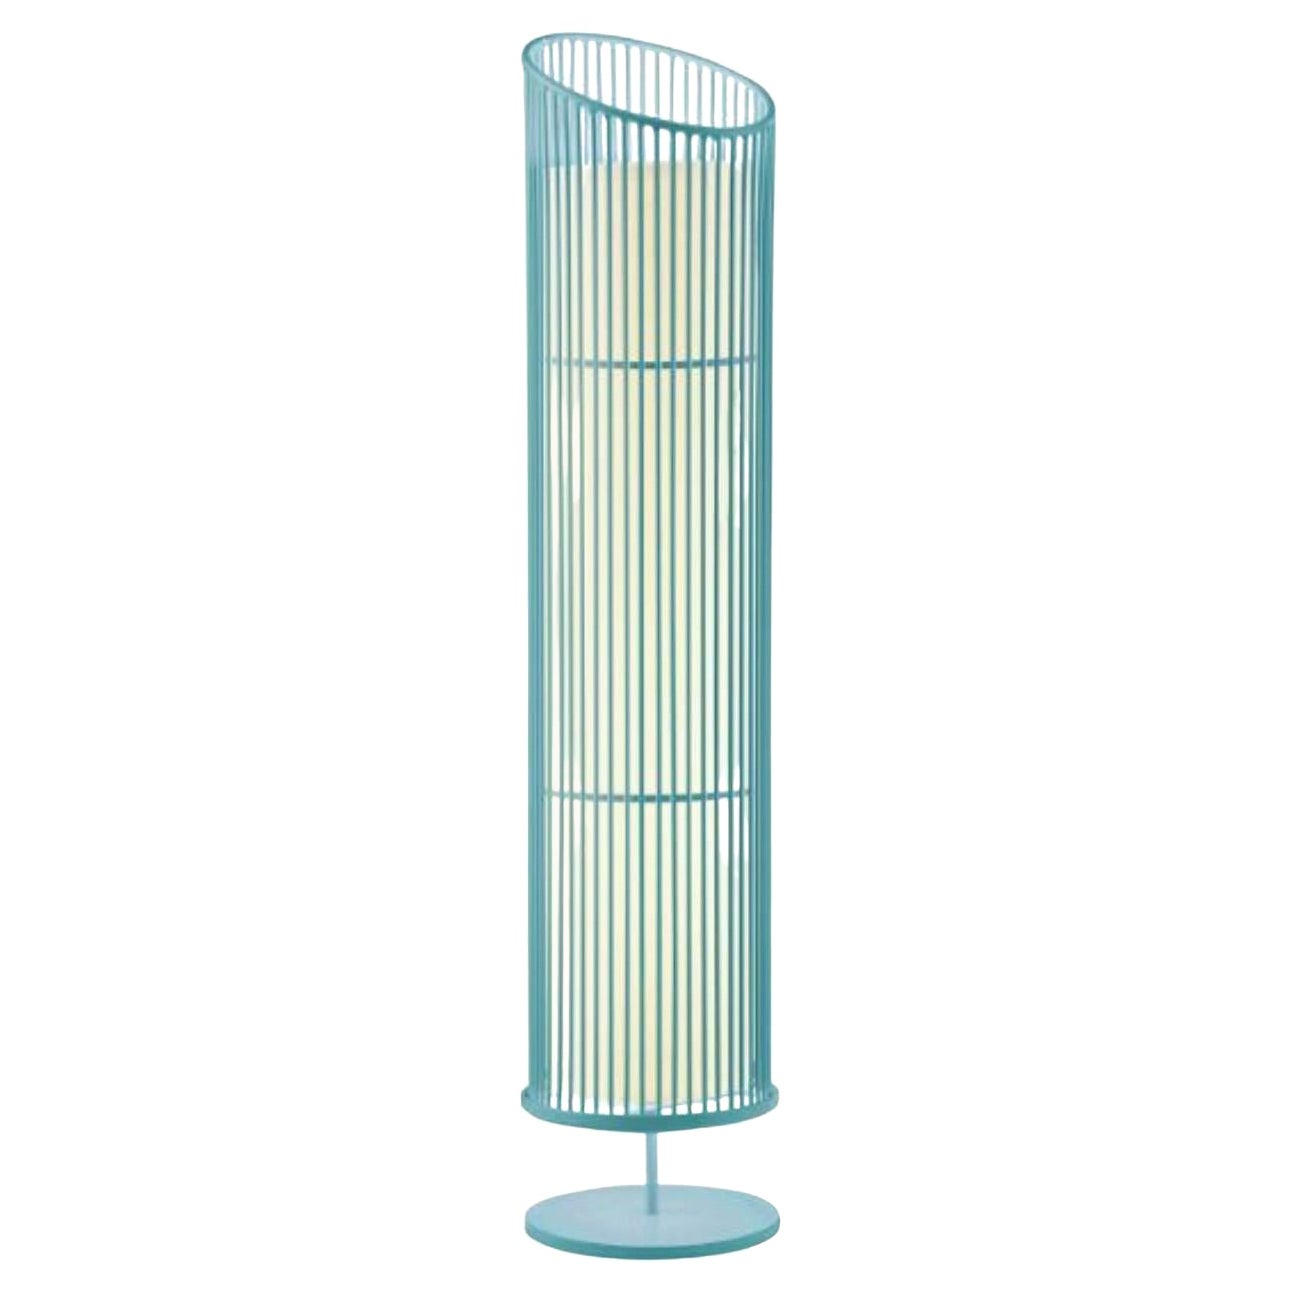 Mint New Spider Floor Lamp by Dooq For Sale